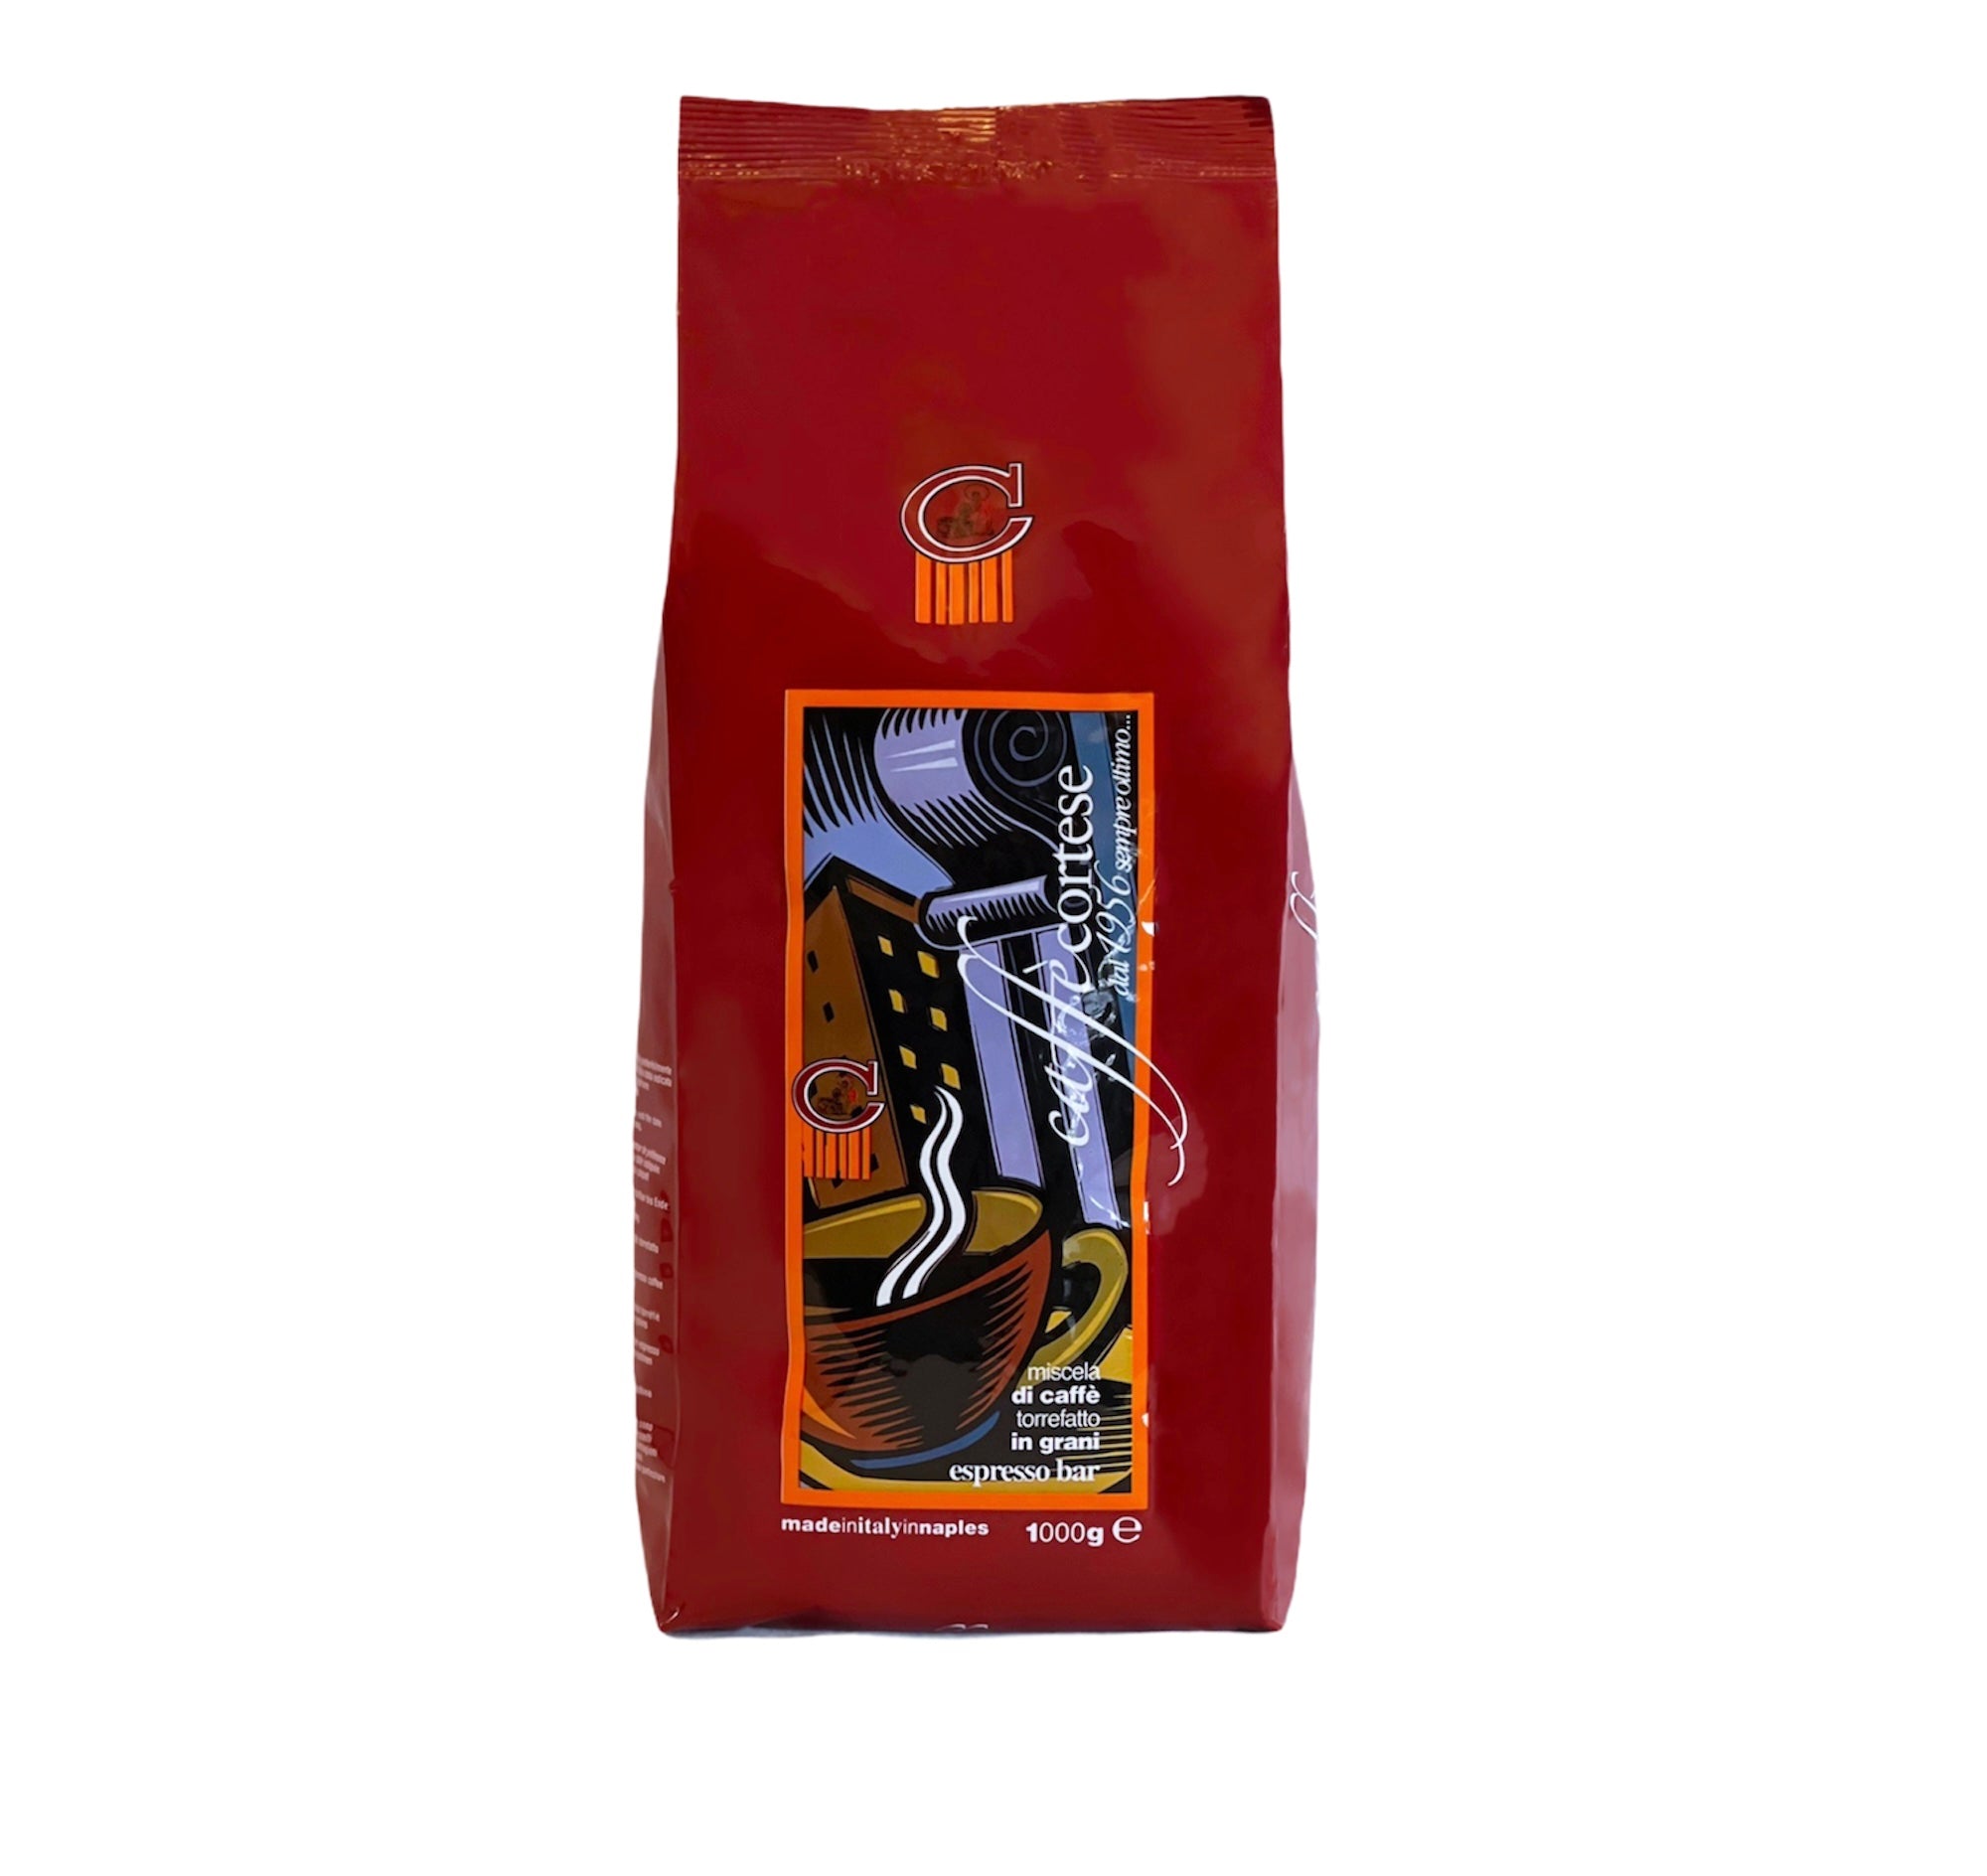 Caffe cortese, whole coffee beans roasted in Naples, Italy, 1 kg red bad.